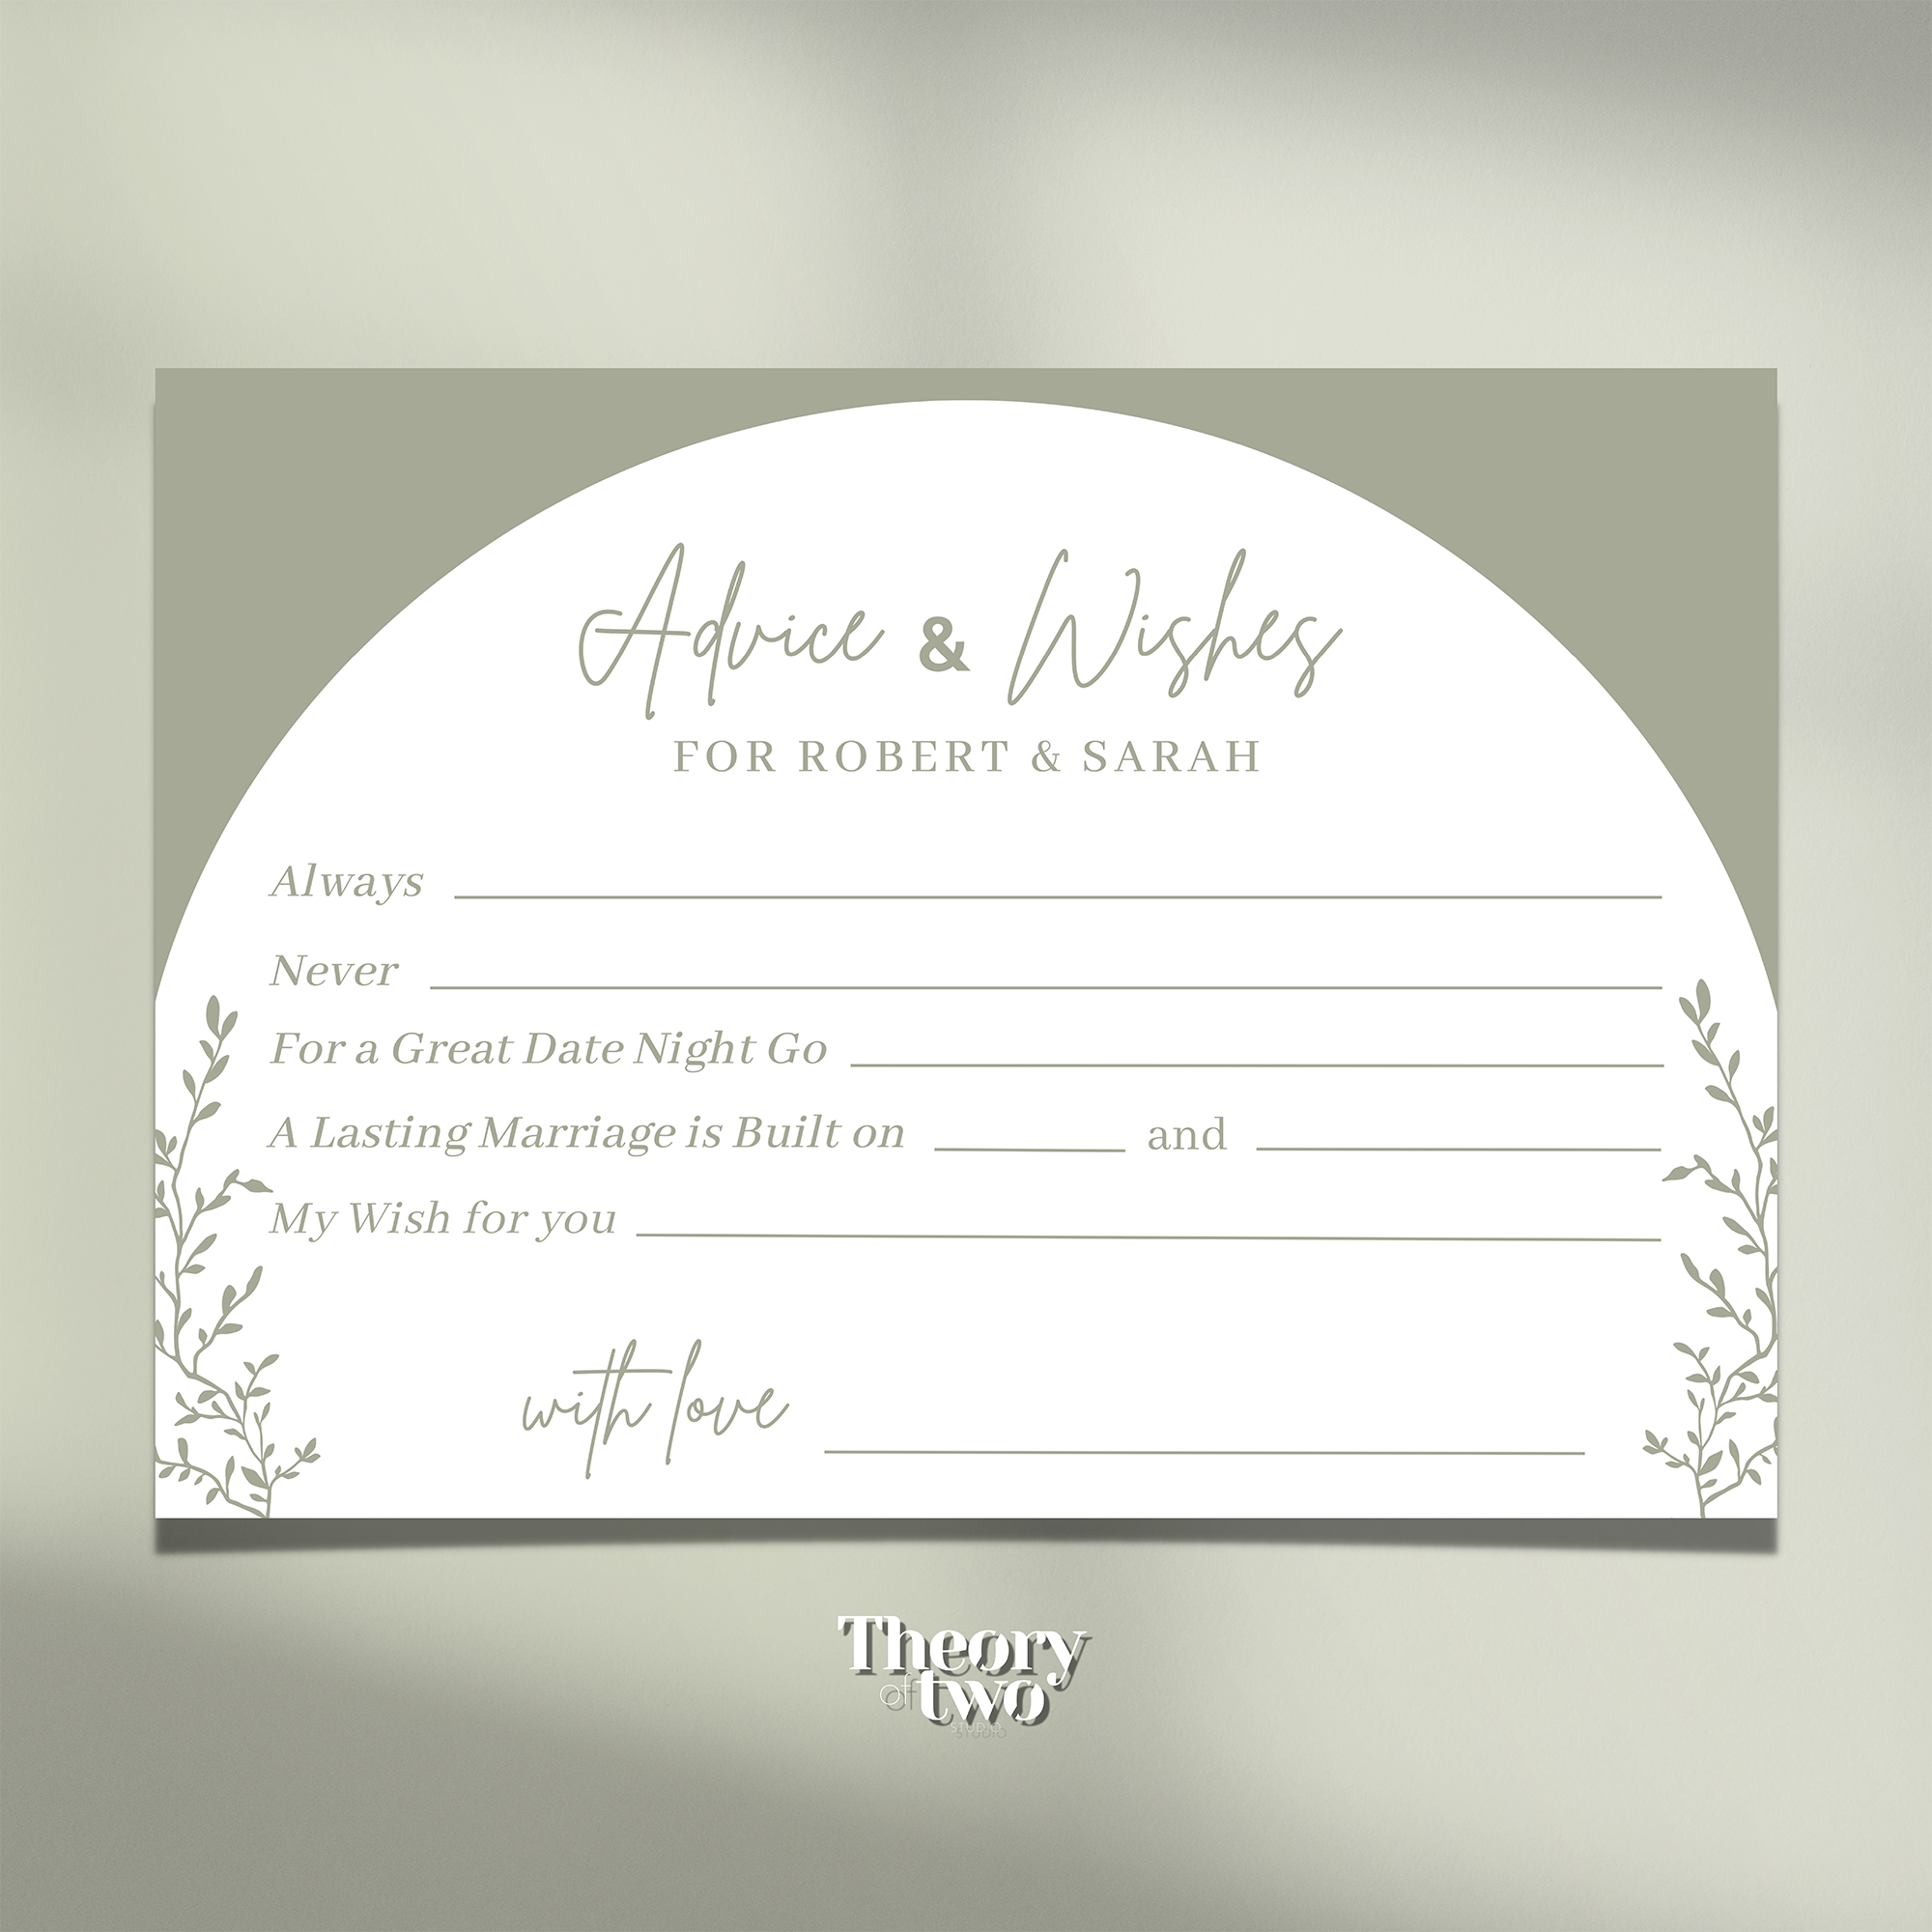 ELEGANT OLIVE GREEN WEDDING ADVICE CARDS FOR THE BRIDE AND GROOM | Singapore Wedding Card